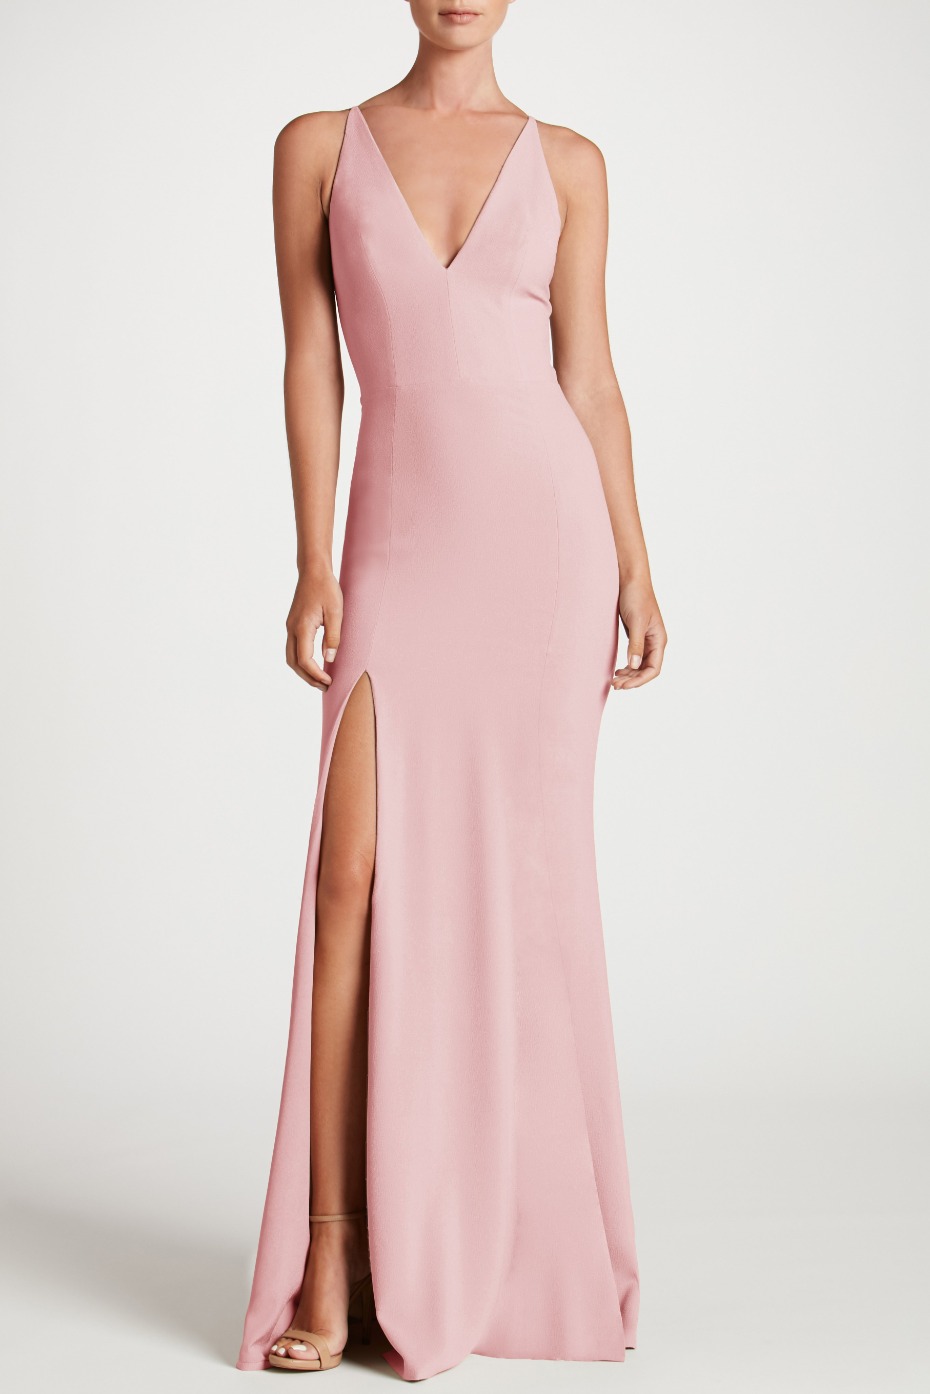 dress-the-population-iris-crepe-side-slit-gown-in